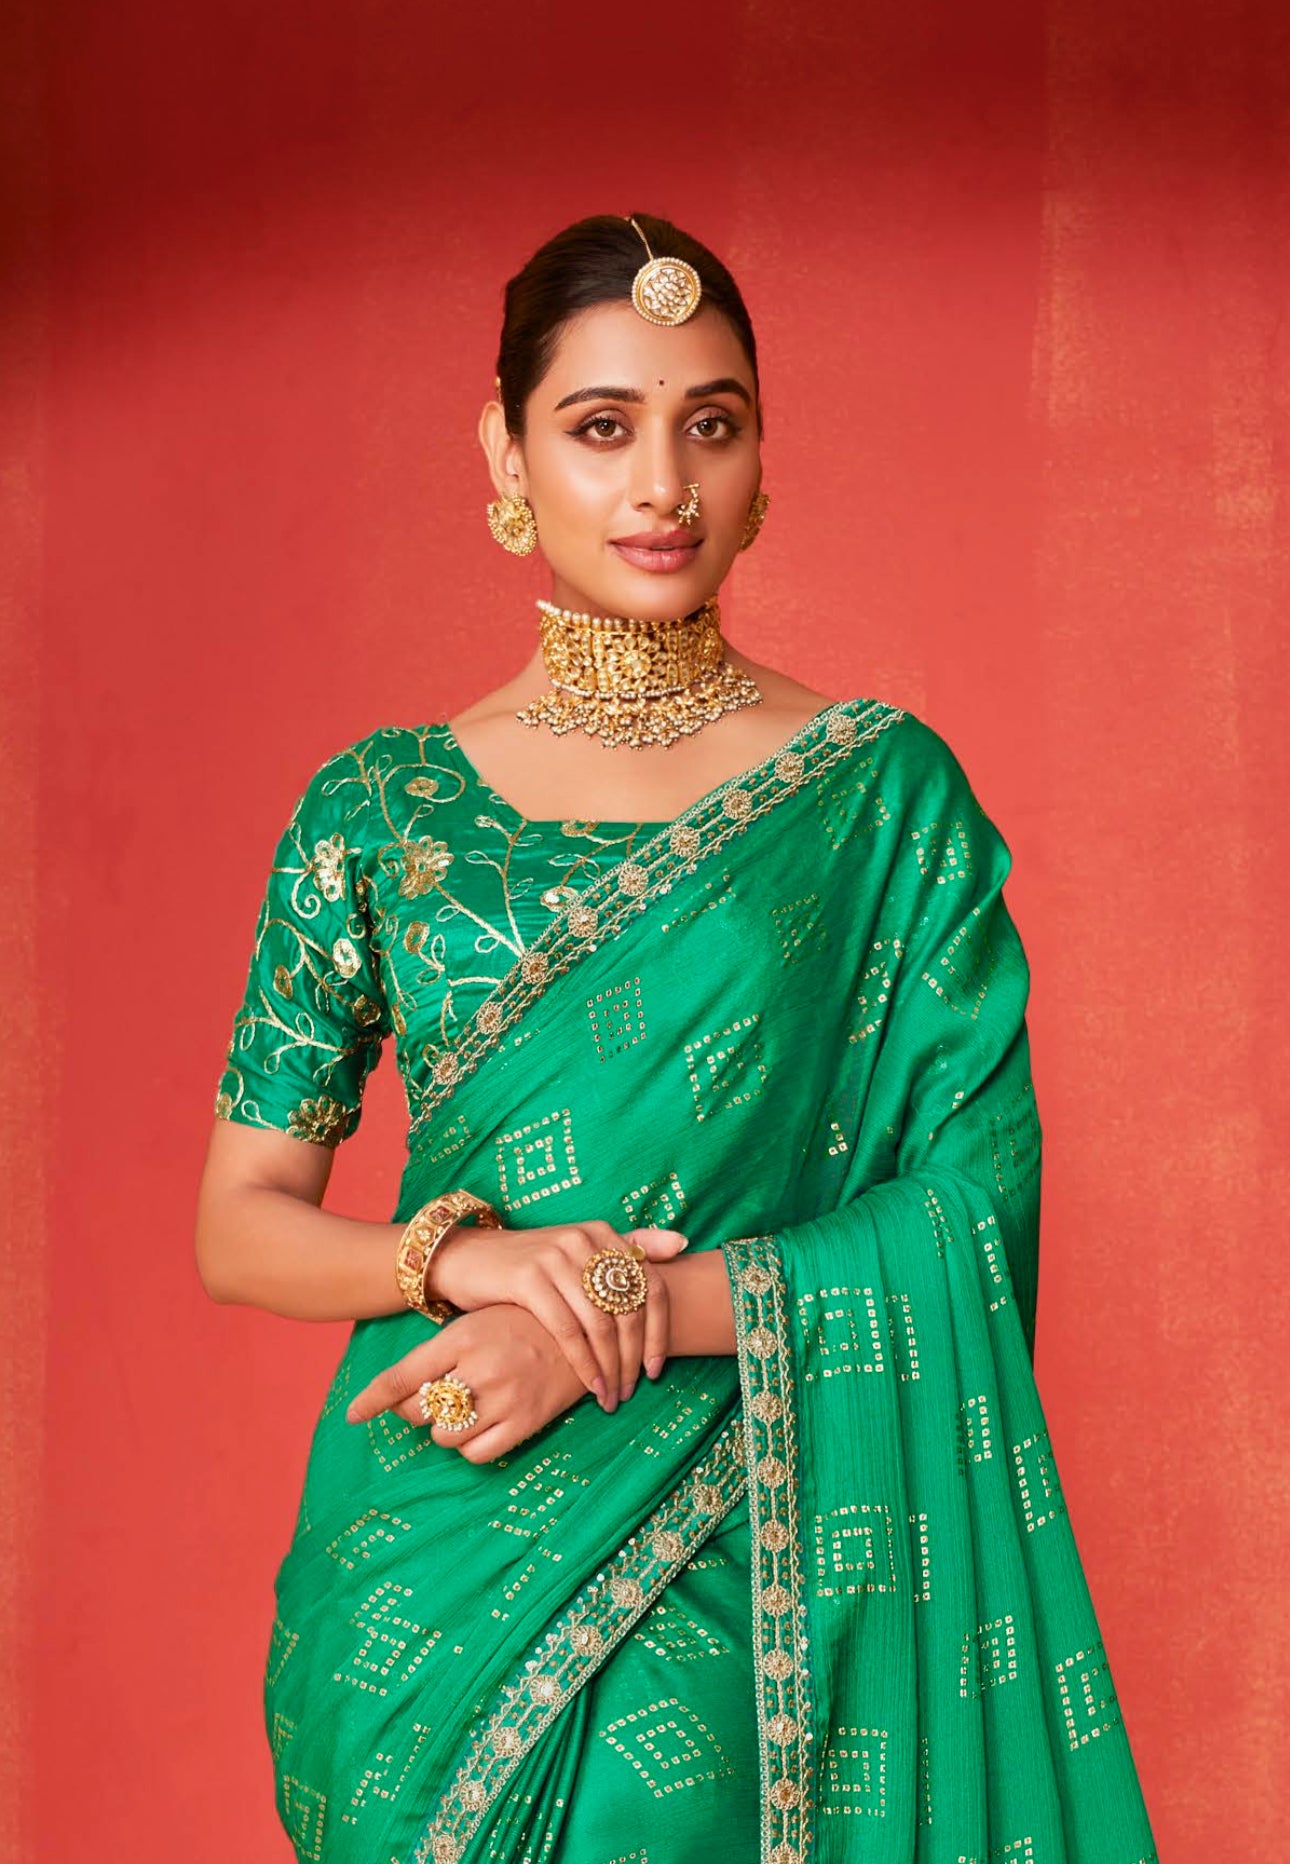 Green Haze Moss Chiffon Foil Mill Print And Embroidery Work Border Saree With Fancy Work Blouse Sbs4